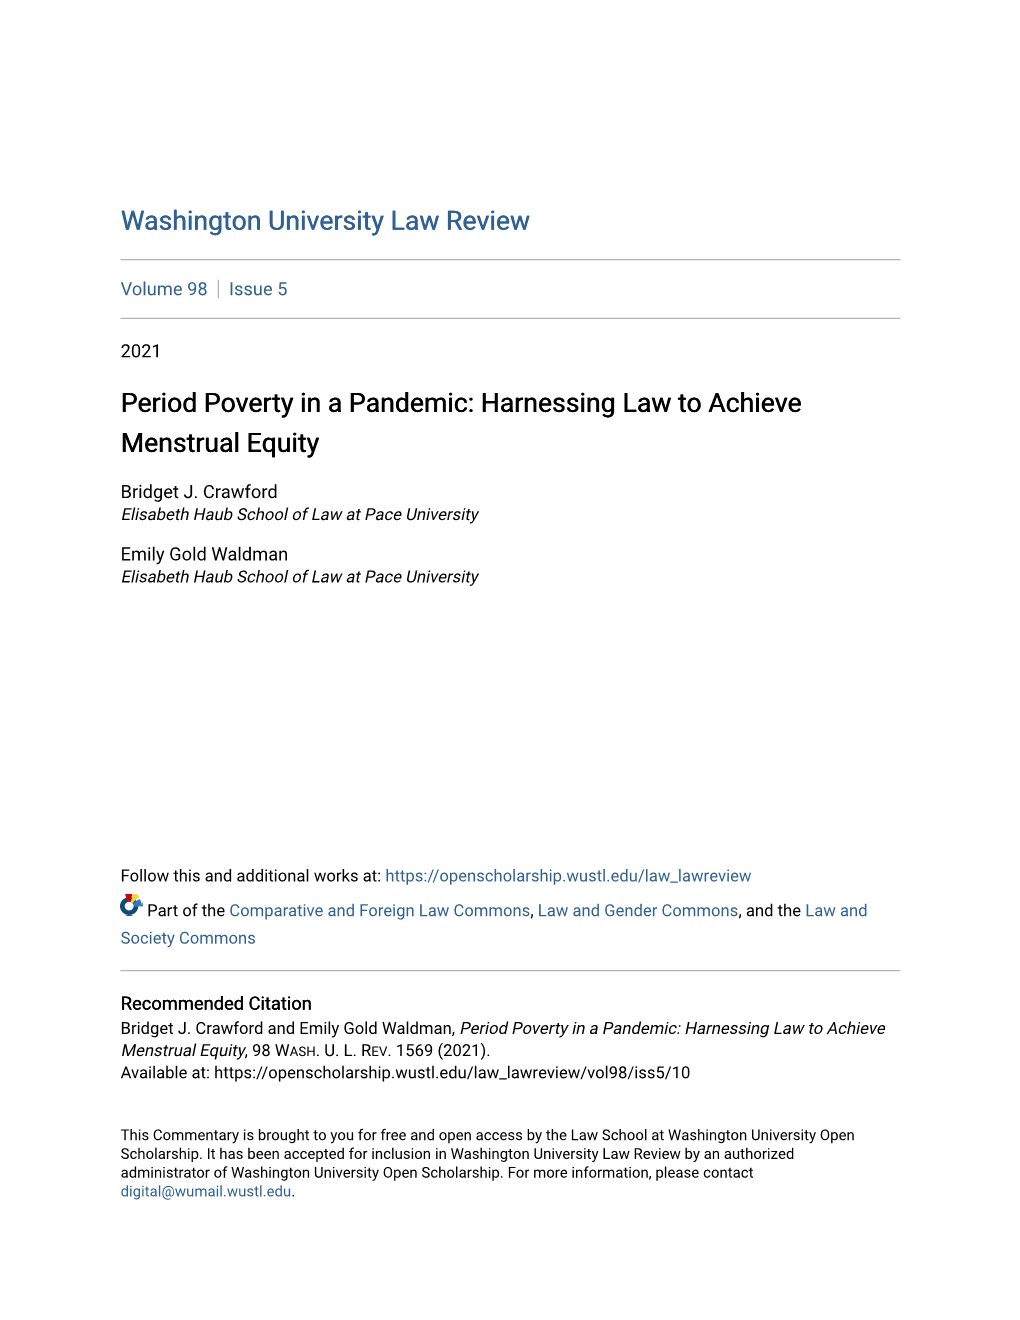 Period Poverty in a Pandemic: Harnessing Law to Achieve Menstrual Equity